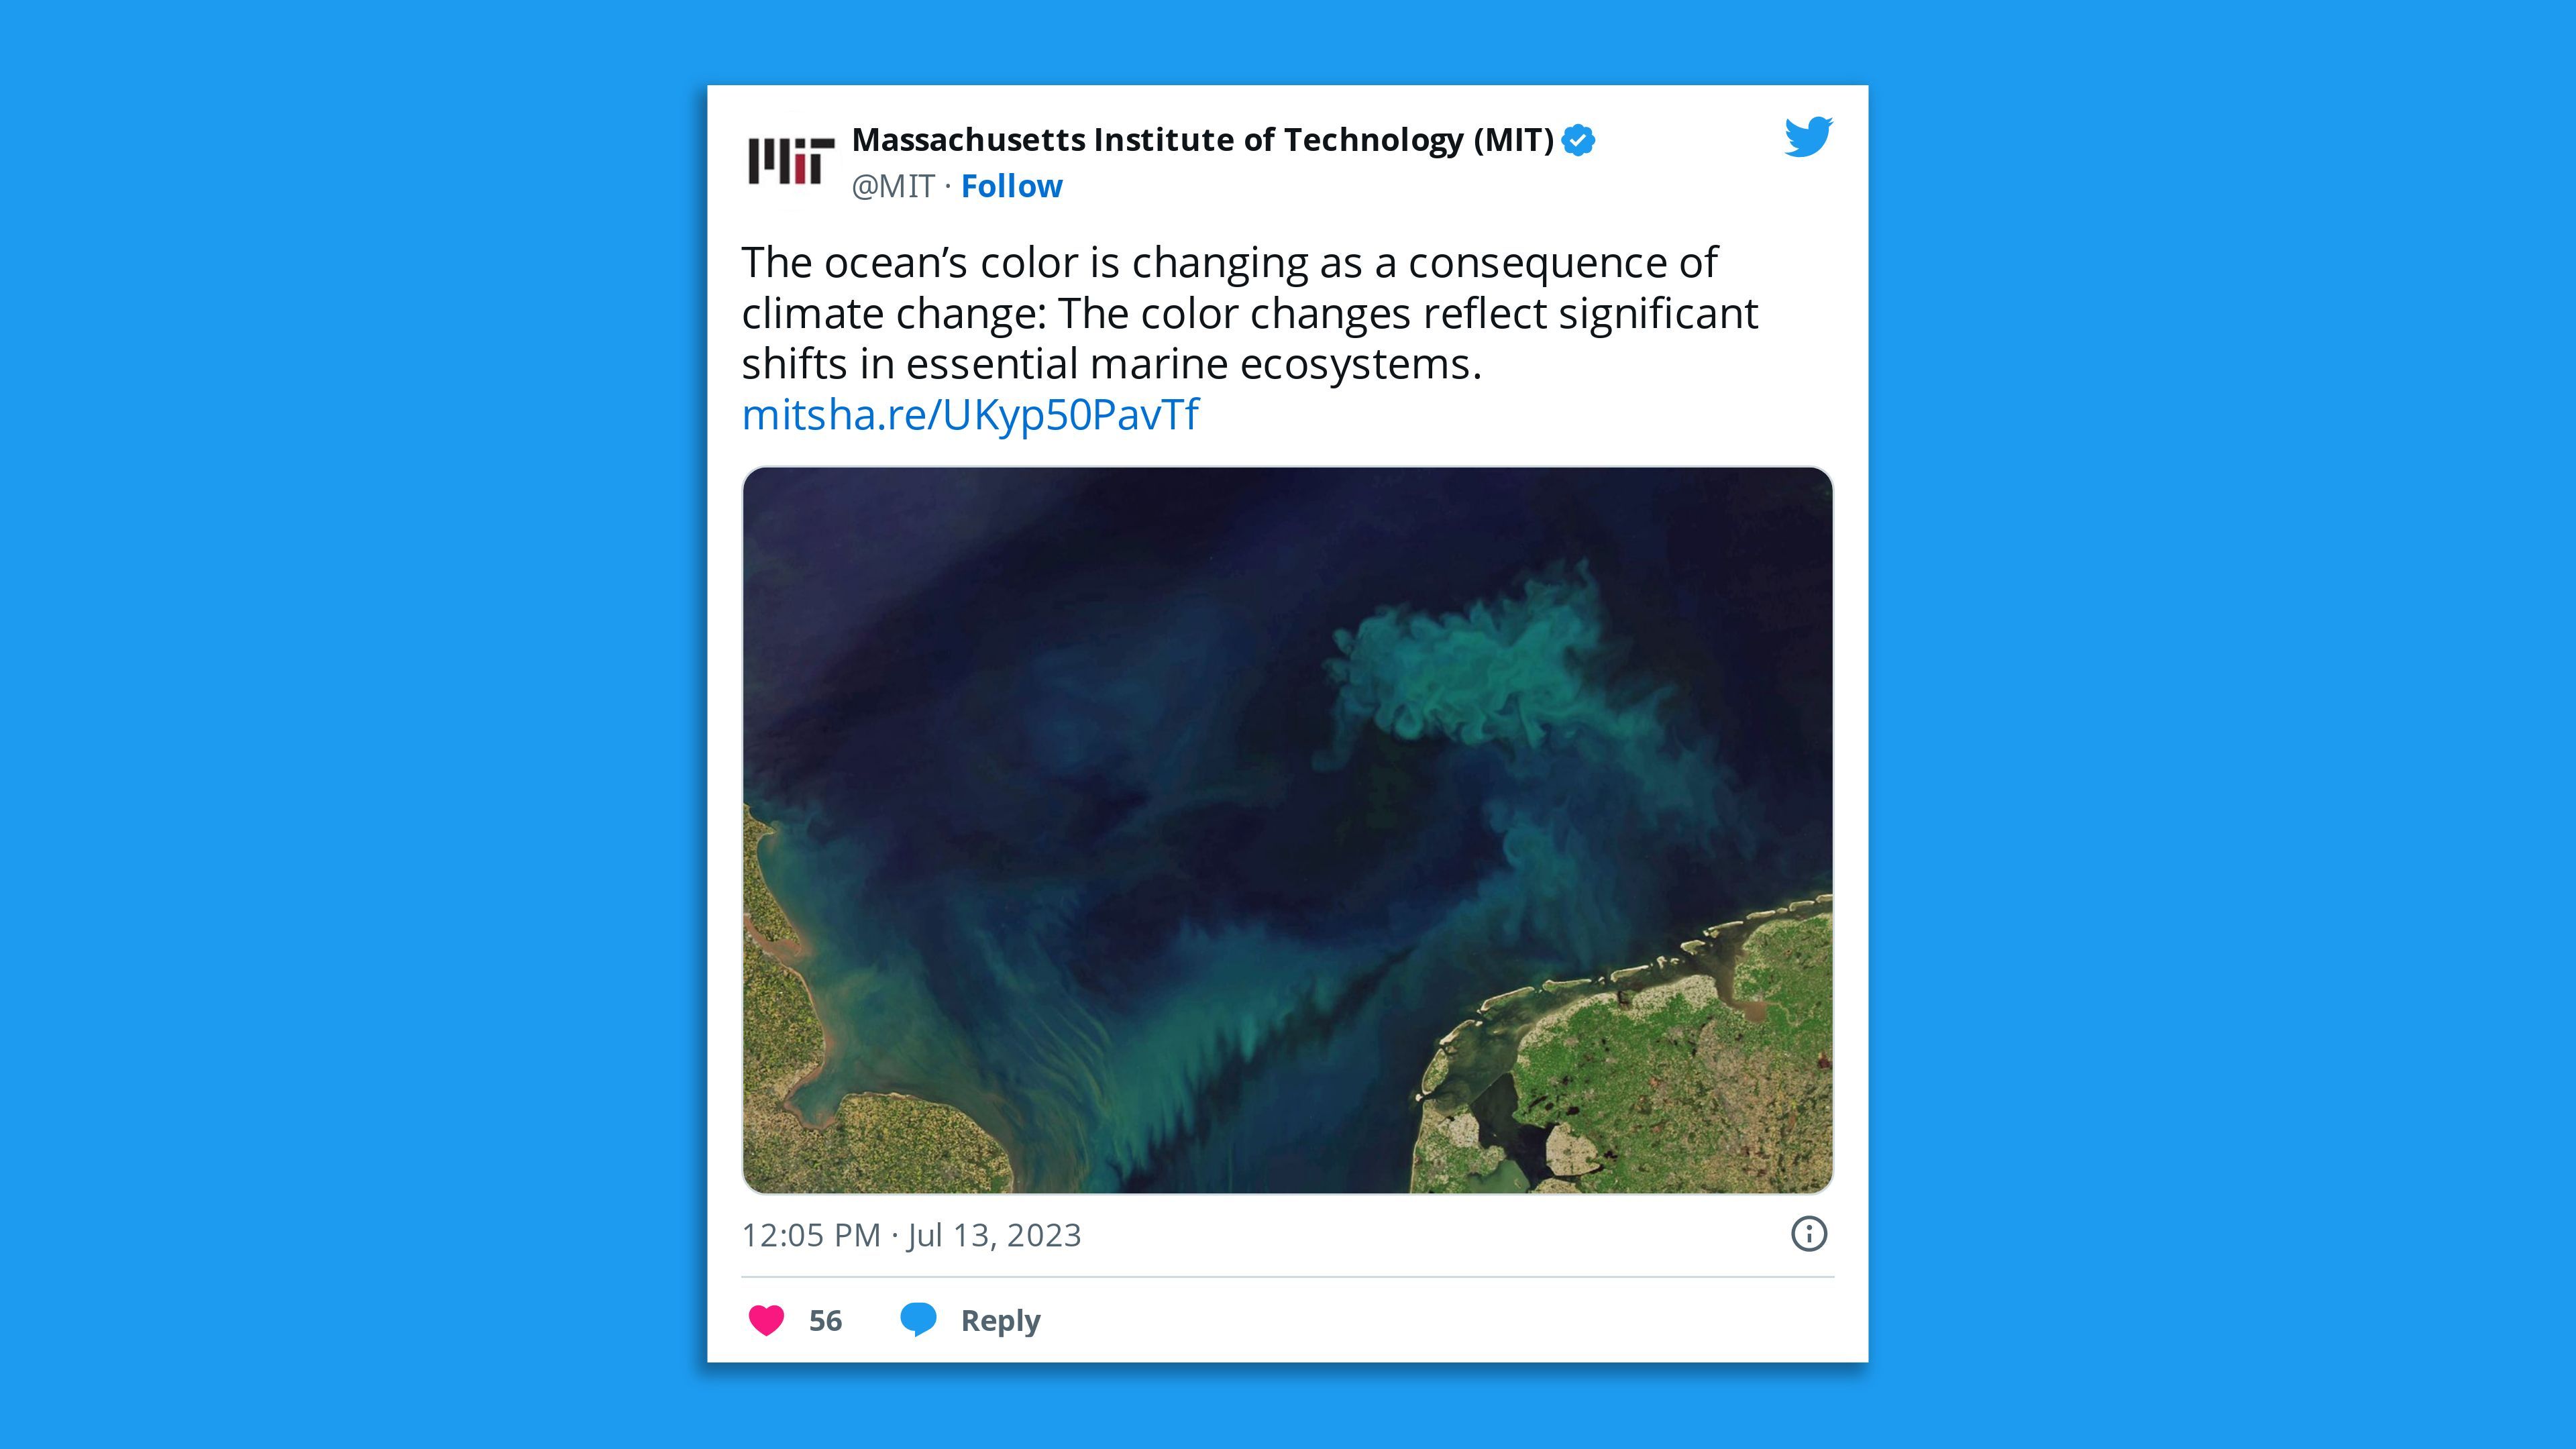 A screenshot of an MIT tweet saying: "The ocean’s color is changing as a consequence of climate change: The color changes reflect significant shifts in essential marine ecosystems."